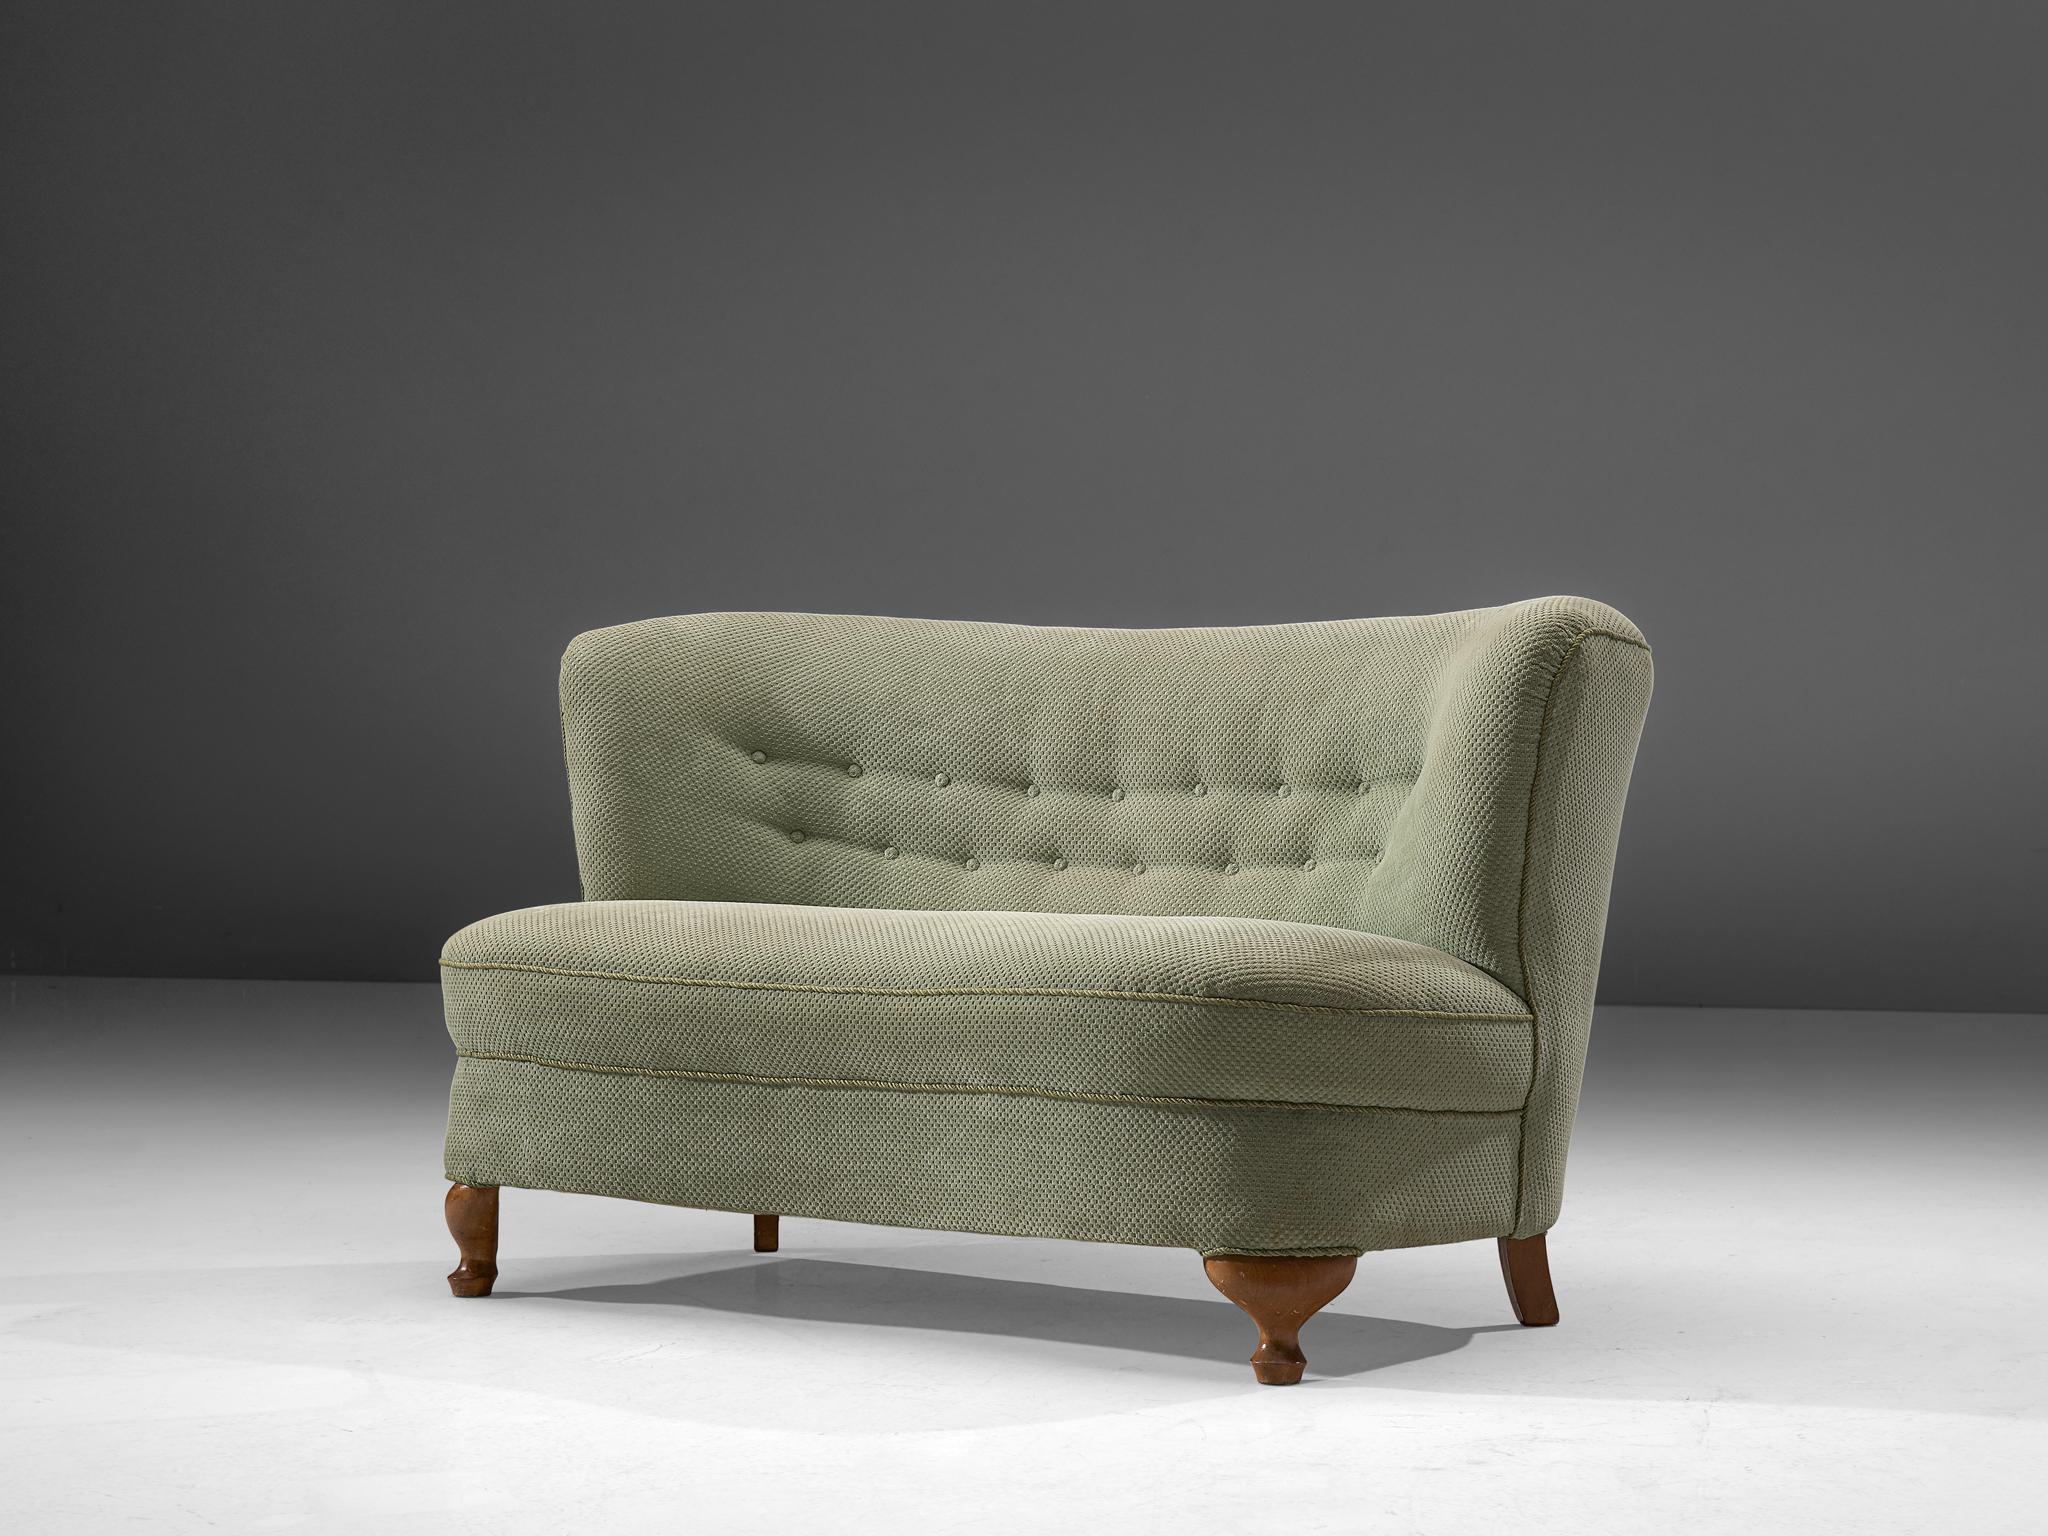 Settee, fabric, stained beech, France, 1940s

This exquisite settee of France origin adopts stylistic motifs of the Art Deco Era as can be seen in the ornate legs and the backrest which has a certain theatrical aesthetic. This design is ably